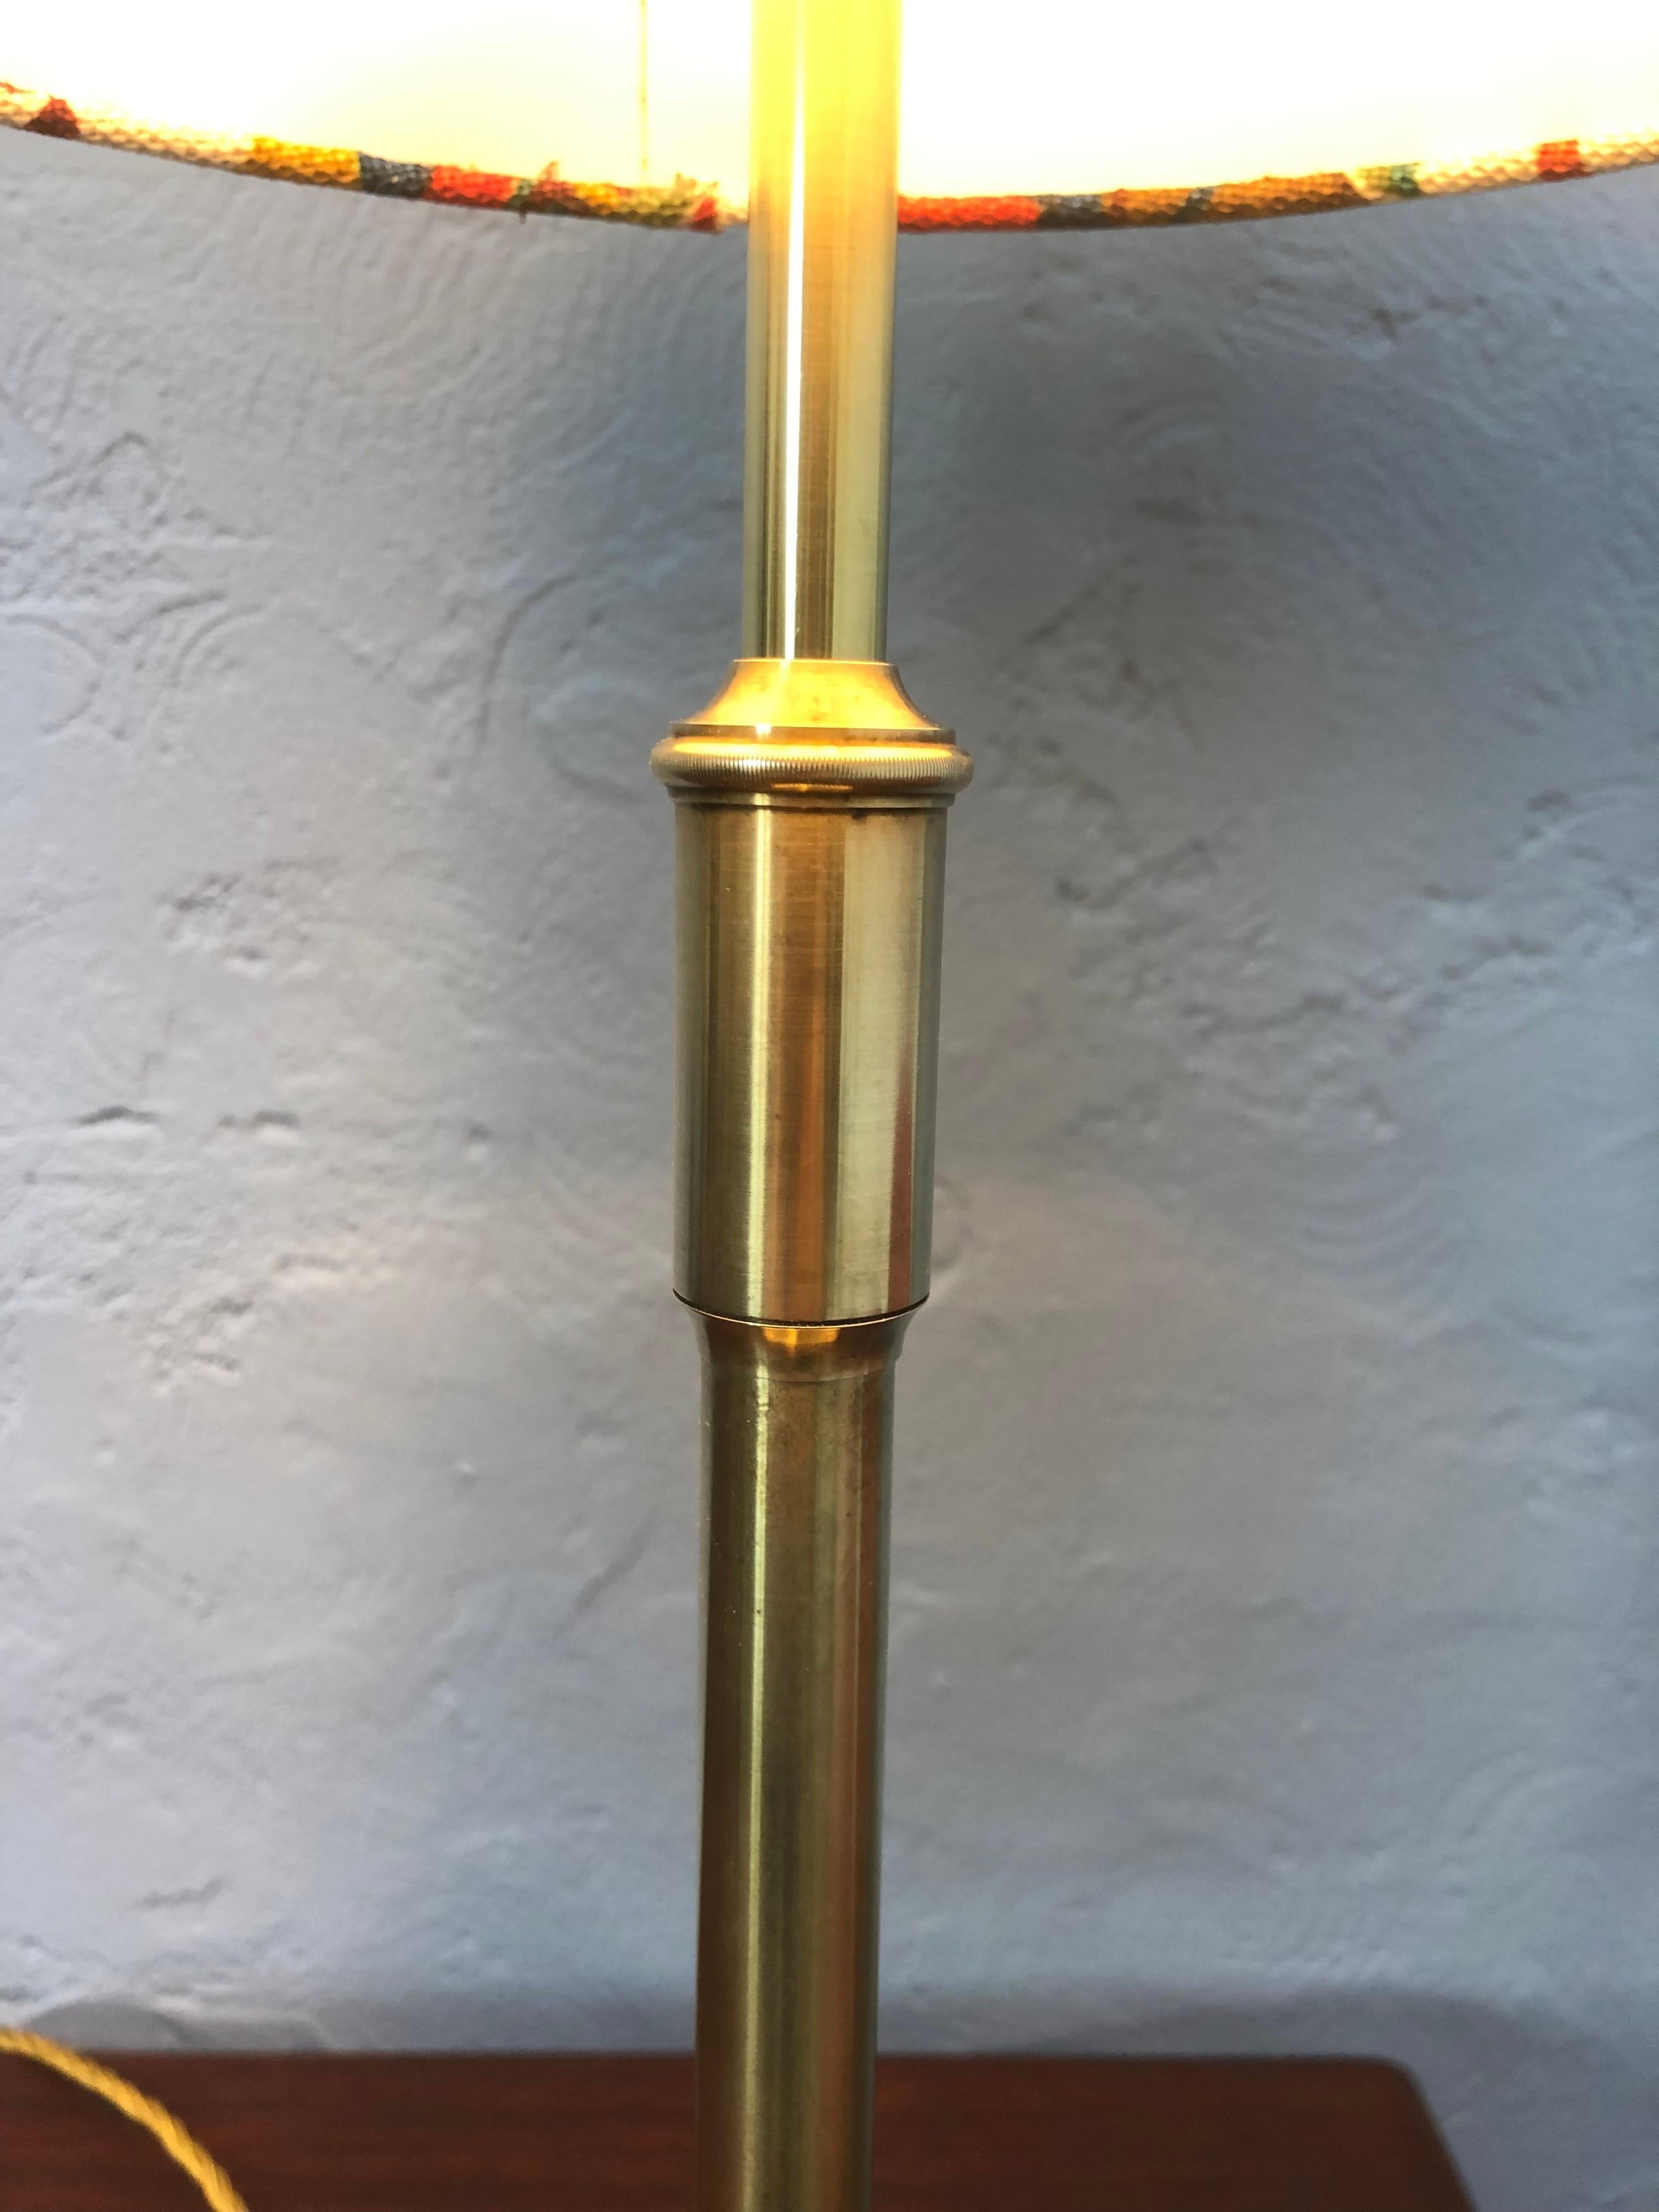 Hand-Crafted Vintage Pair of Brass Table Lamps by Esben Klint for Le Klint from the 1950s For Sale